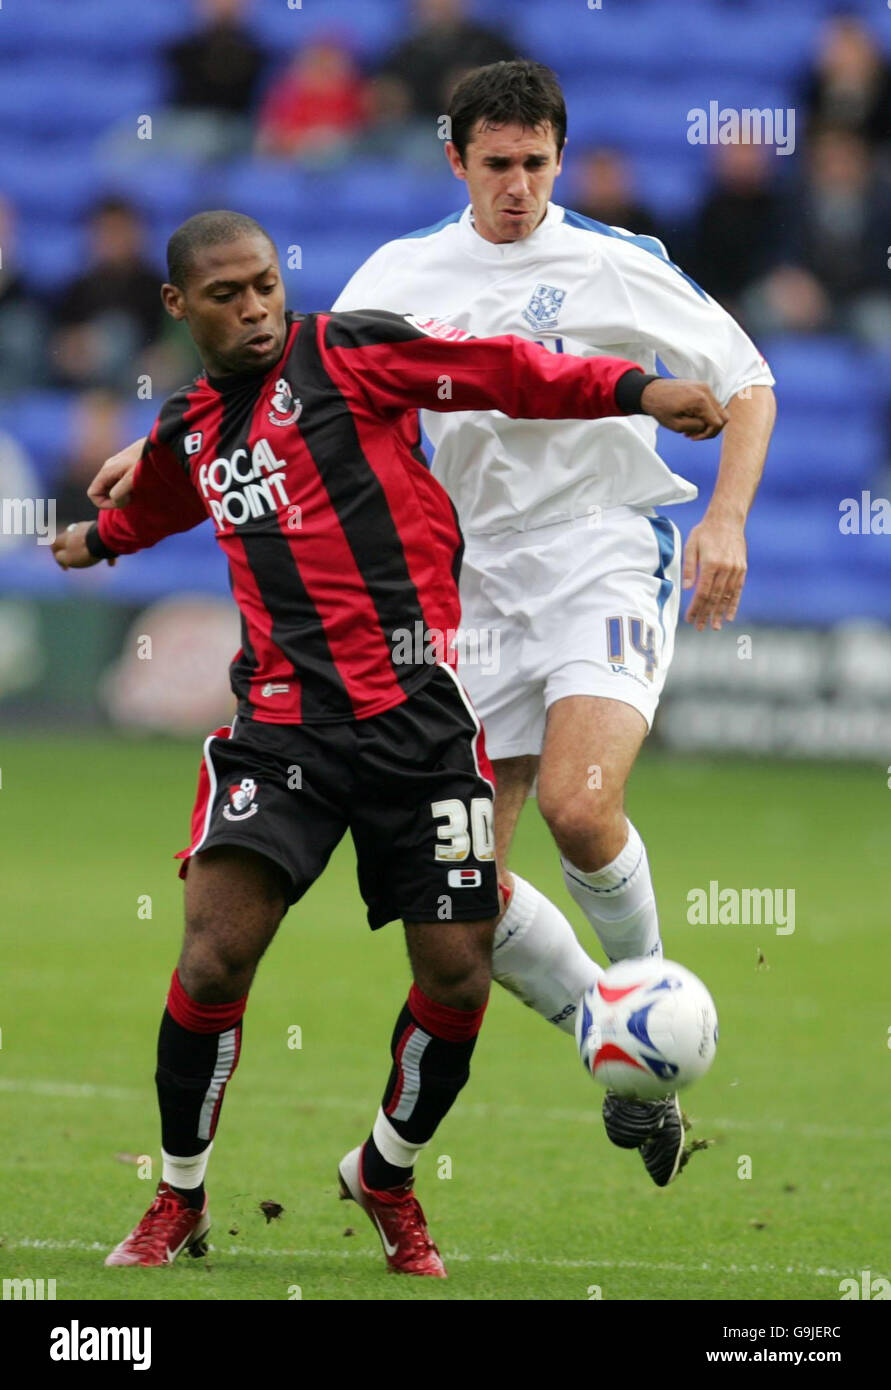 Tranmere's John Thompson (right) and Bournemouth's Franck Songo'o battle for the ball during the Coca-Cola League One match at Prenton Park, Birkenhead. Stock Photo